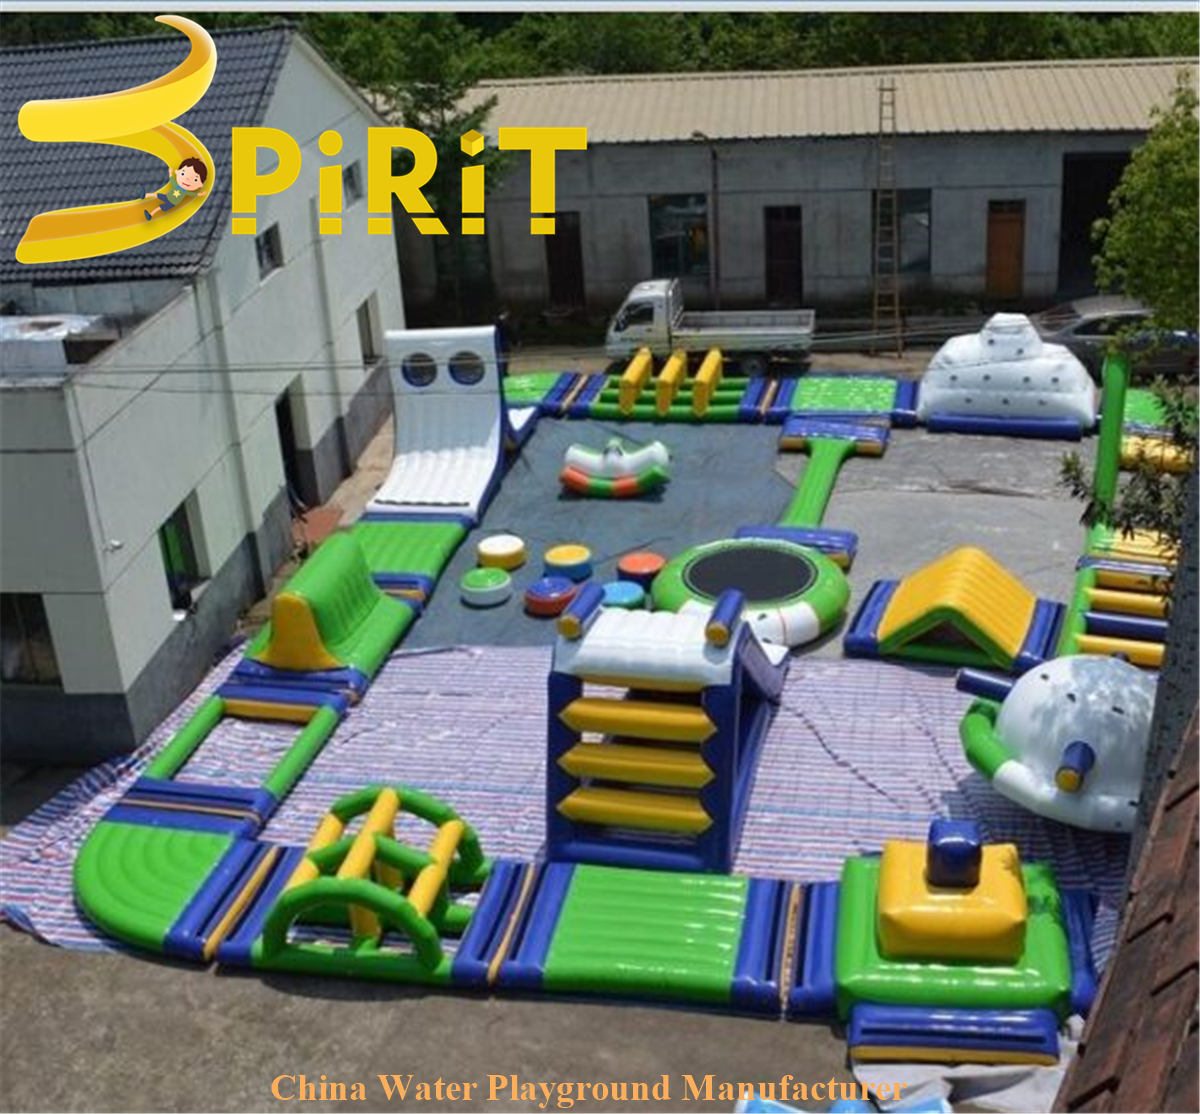 Amazing inflatable playground on water near me for adults.-SPIRIT PLAY,Outdoor Playground, Indoor Playground,Trampoline Park,Outdoor Fitness,Inflatable,Soft Playground,Ninja Warrior,Trampoline Park,Playground Structure,Play Structure,Outdoor Fitness,Water Park,Play System,Freestanding,Interactive,independente ,Inklusibo, Park, Pagsaka sa Bungbong, Dula sa Bata